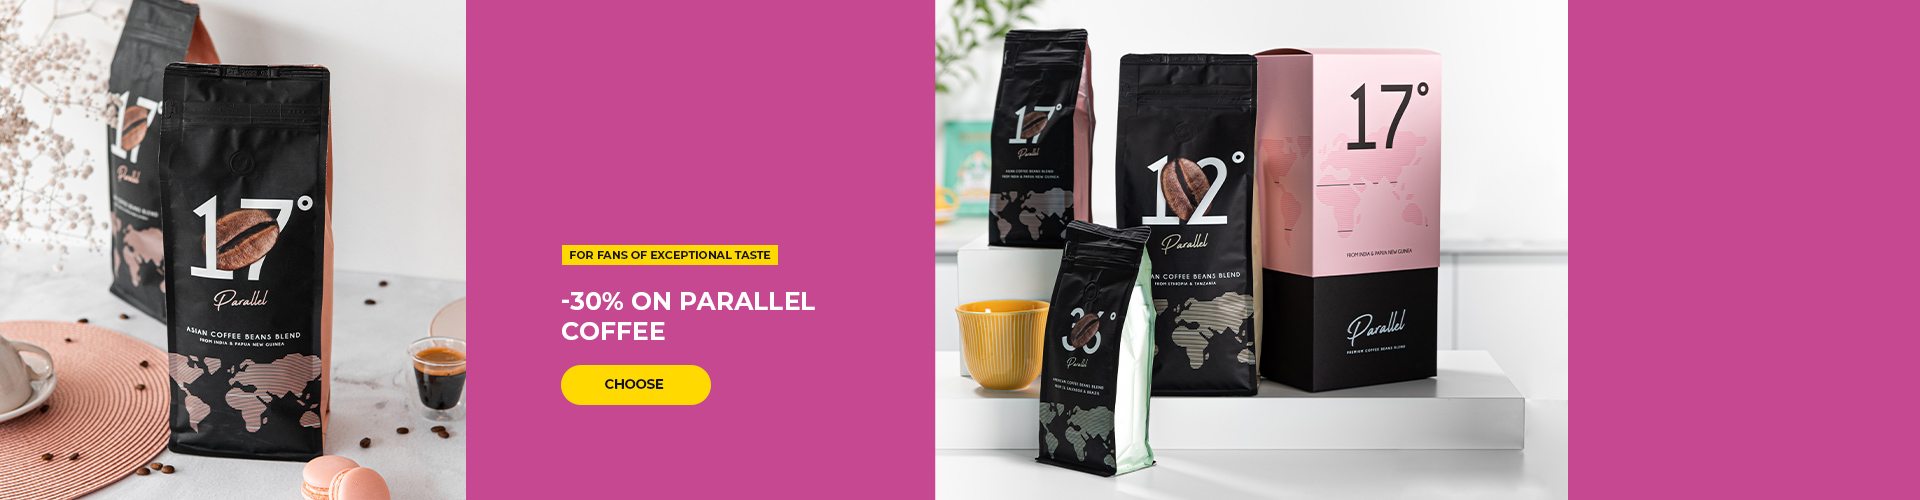 -30% on PARALLEL coffee